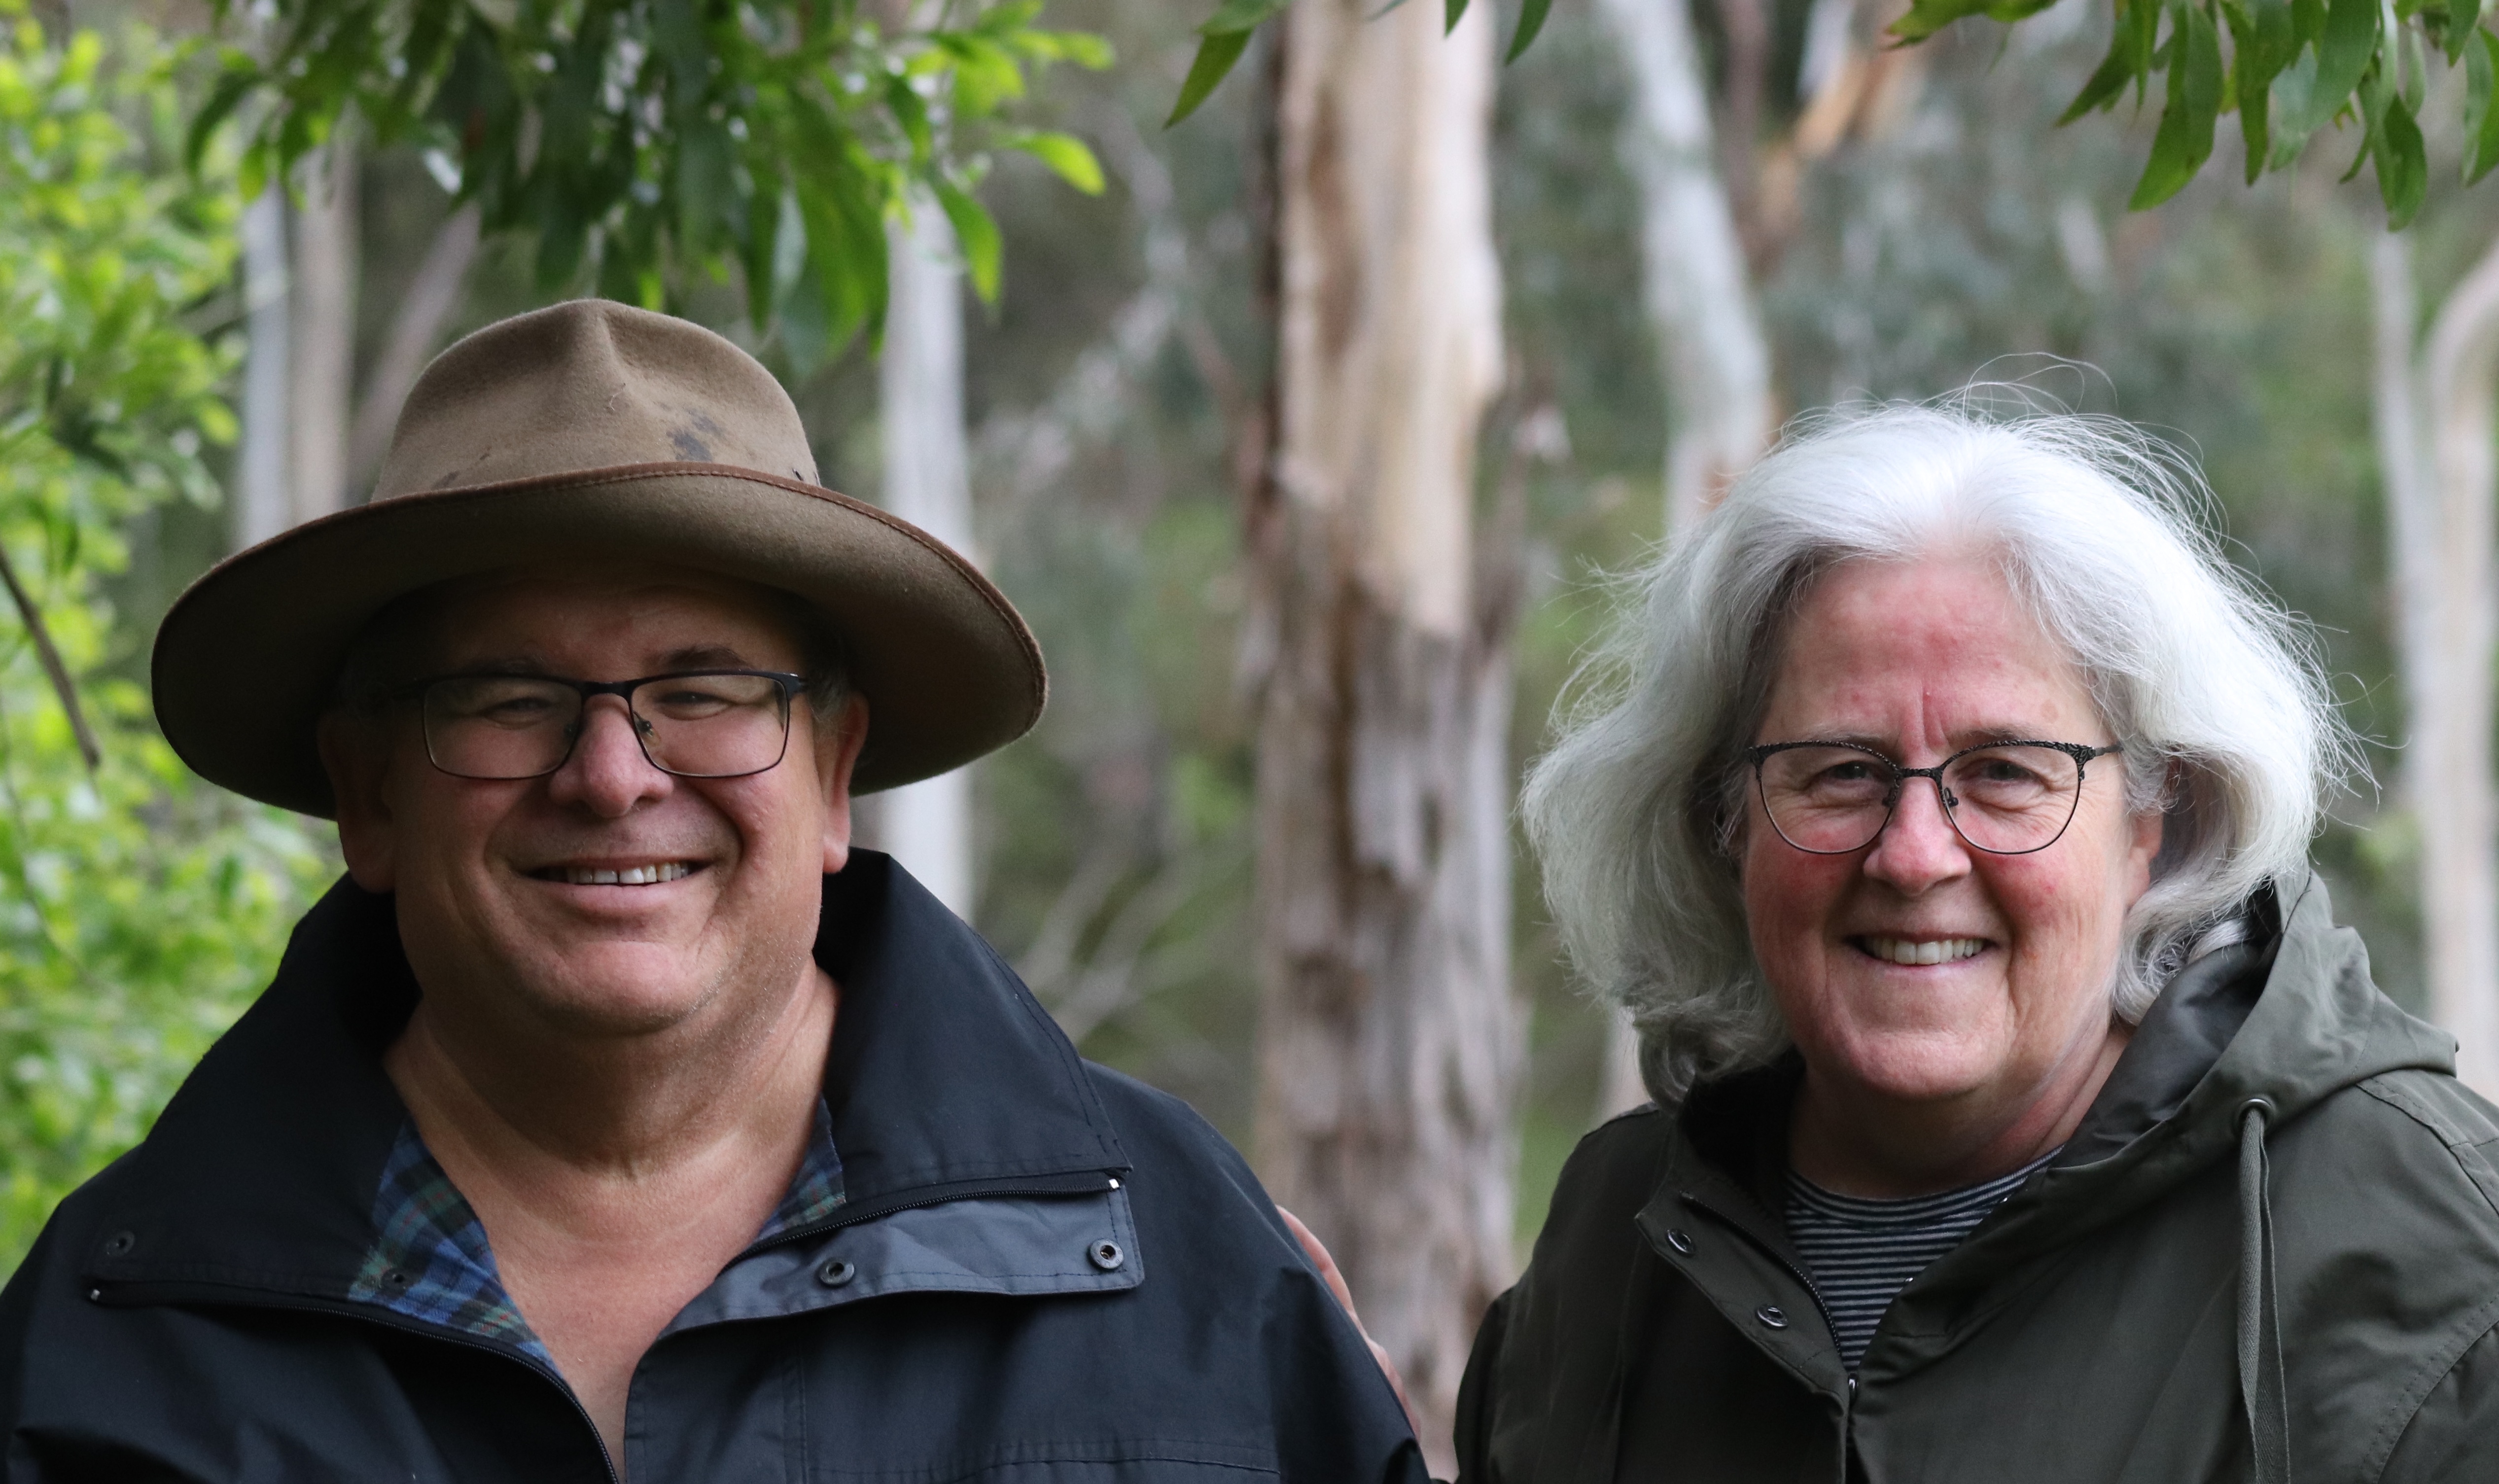 David Mussared and Chris Duigan - NRMjobs founders